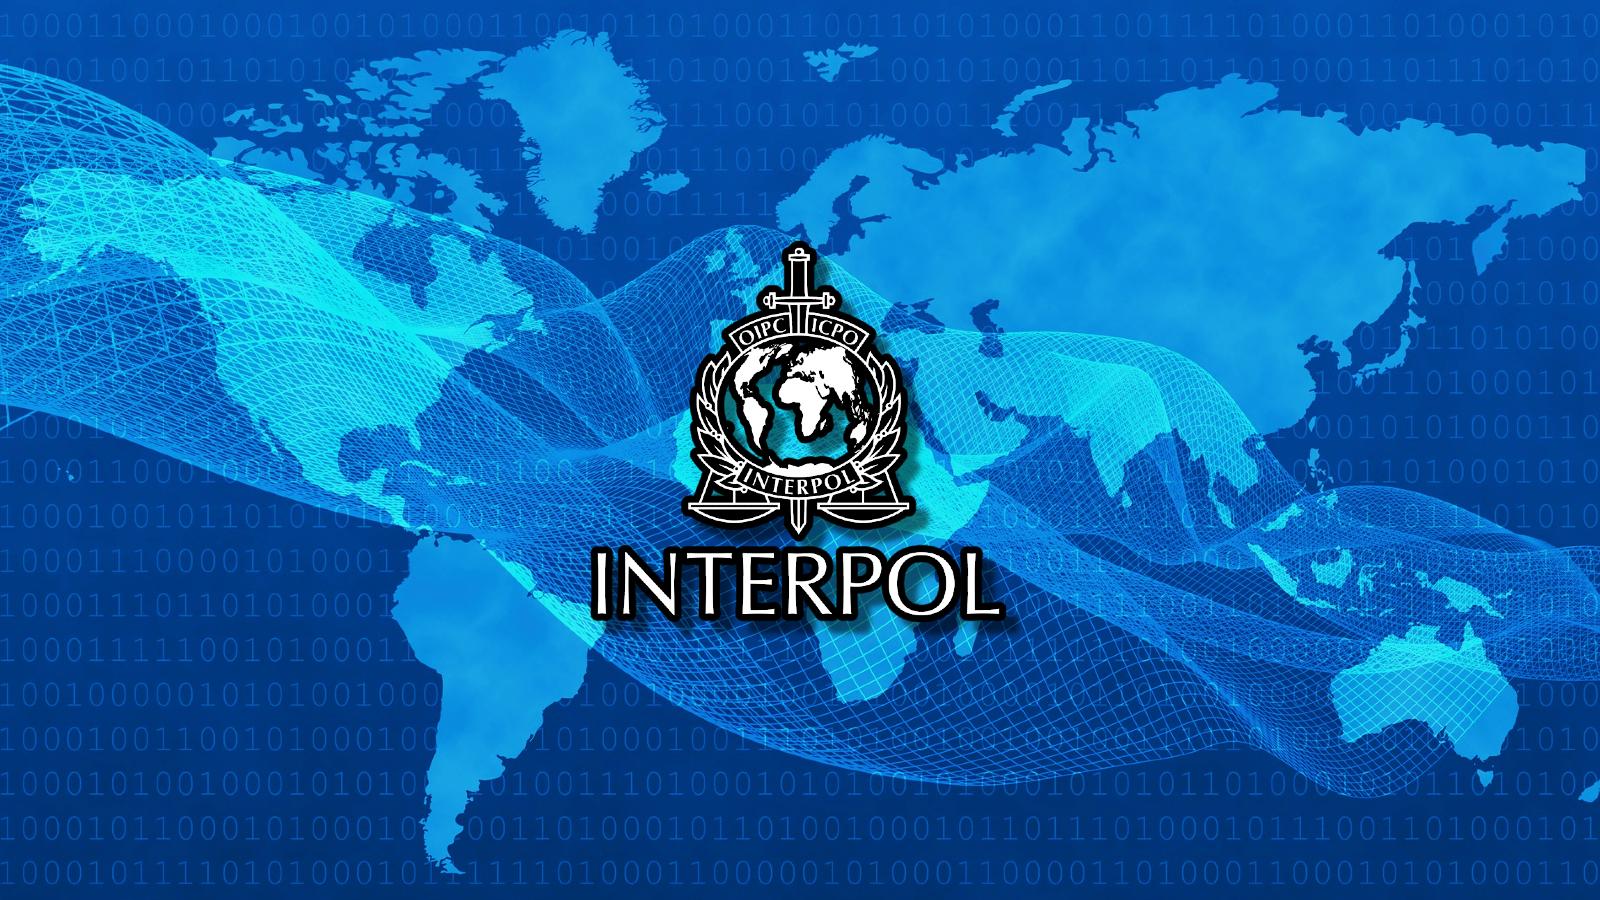 Interpol urges police to unite against 'potential ransomware pandemic'